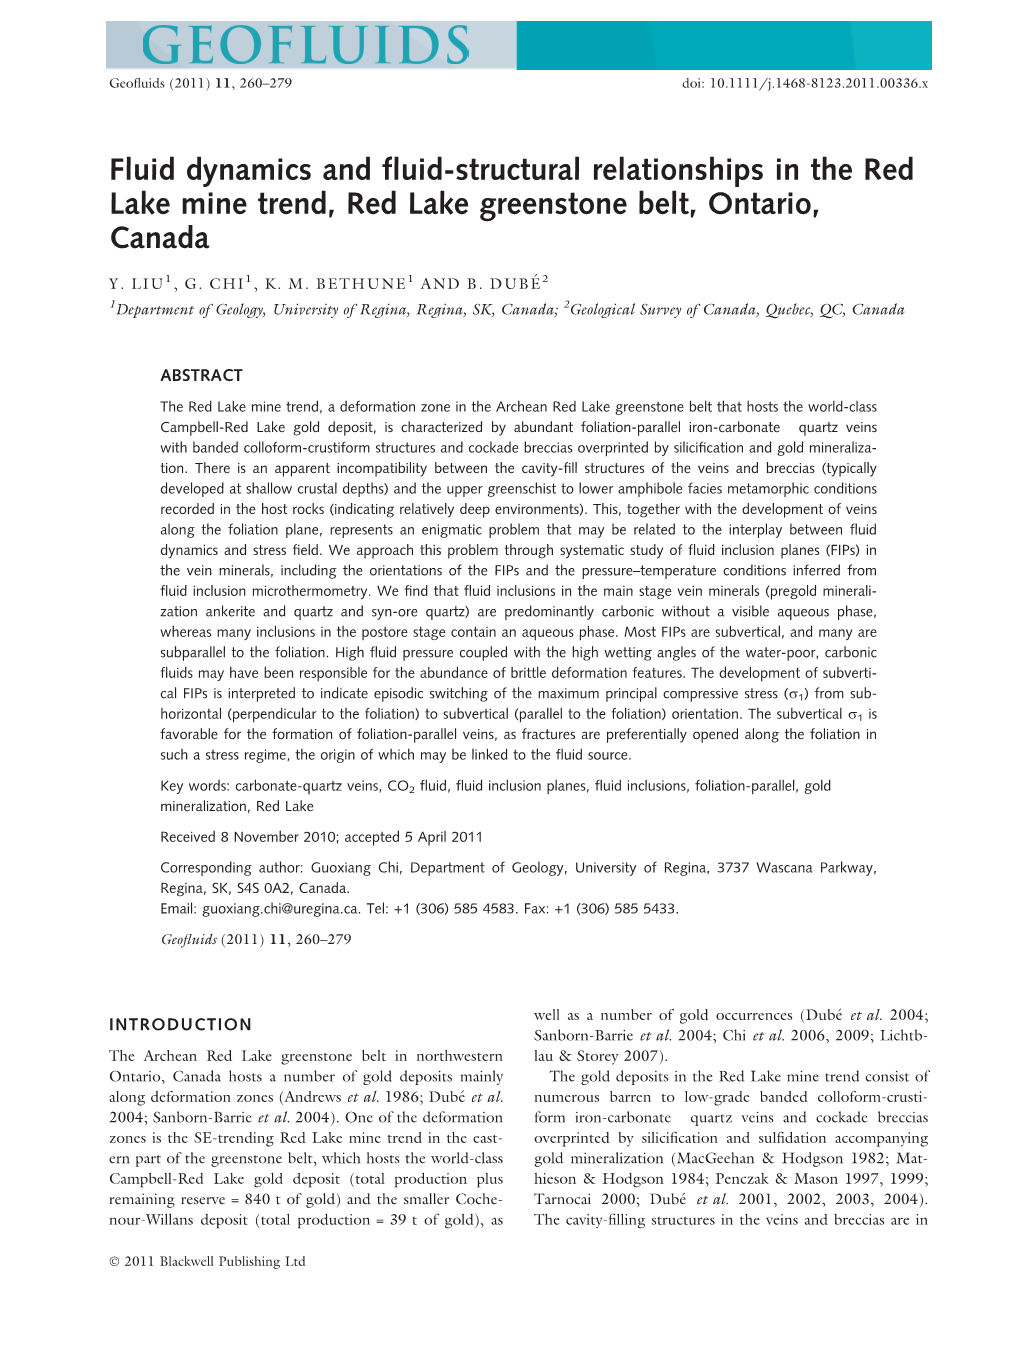 Fluid Dynamics and Fluidstructural Relationships in the Red Lake Mine